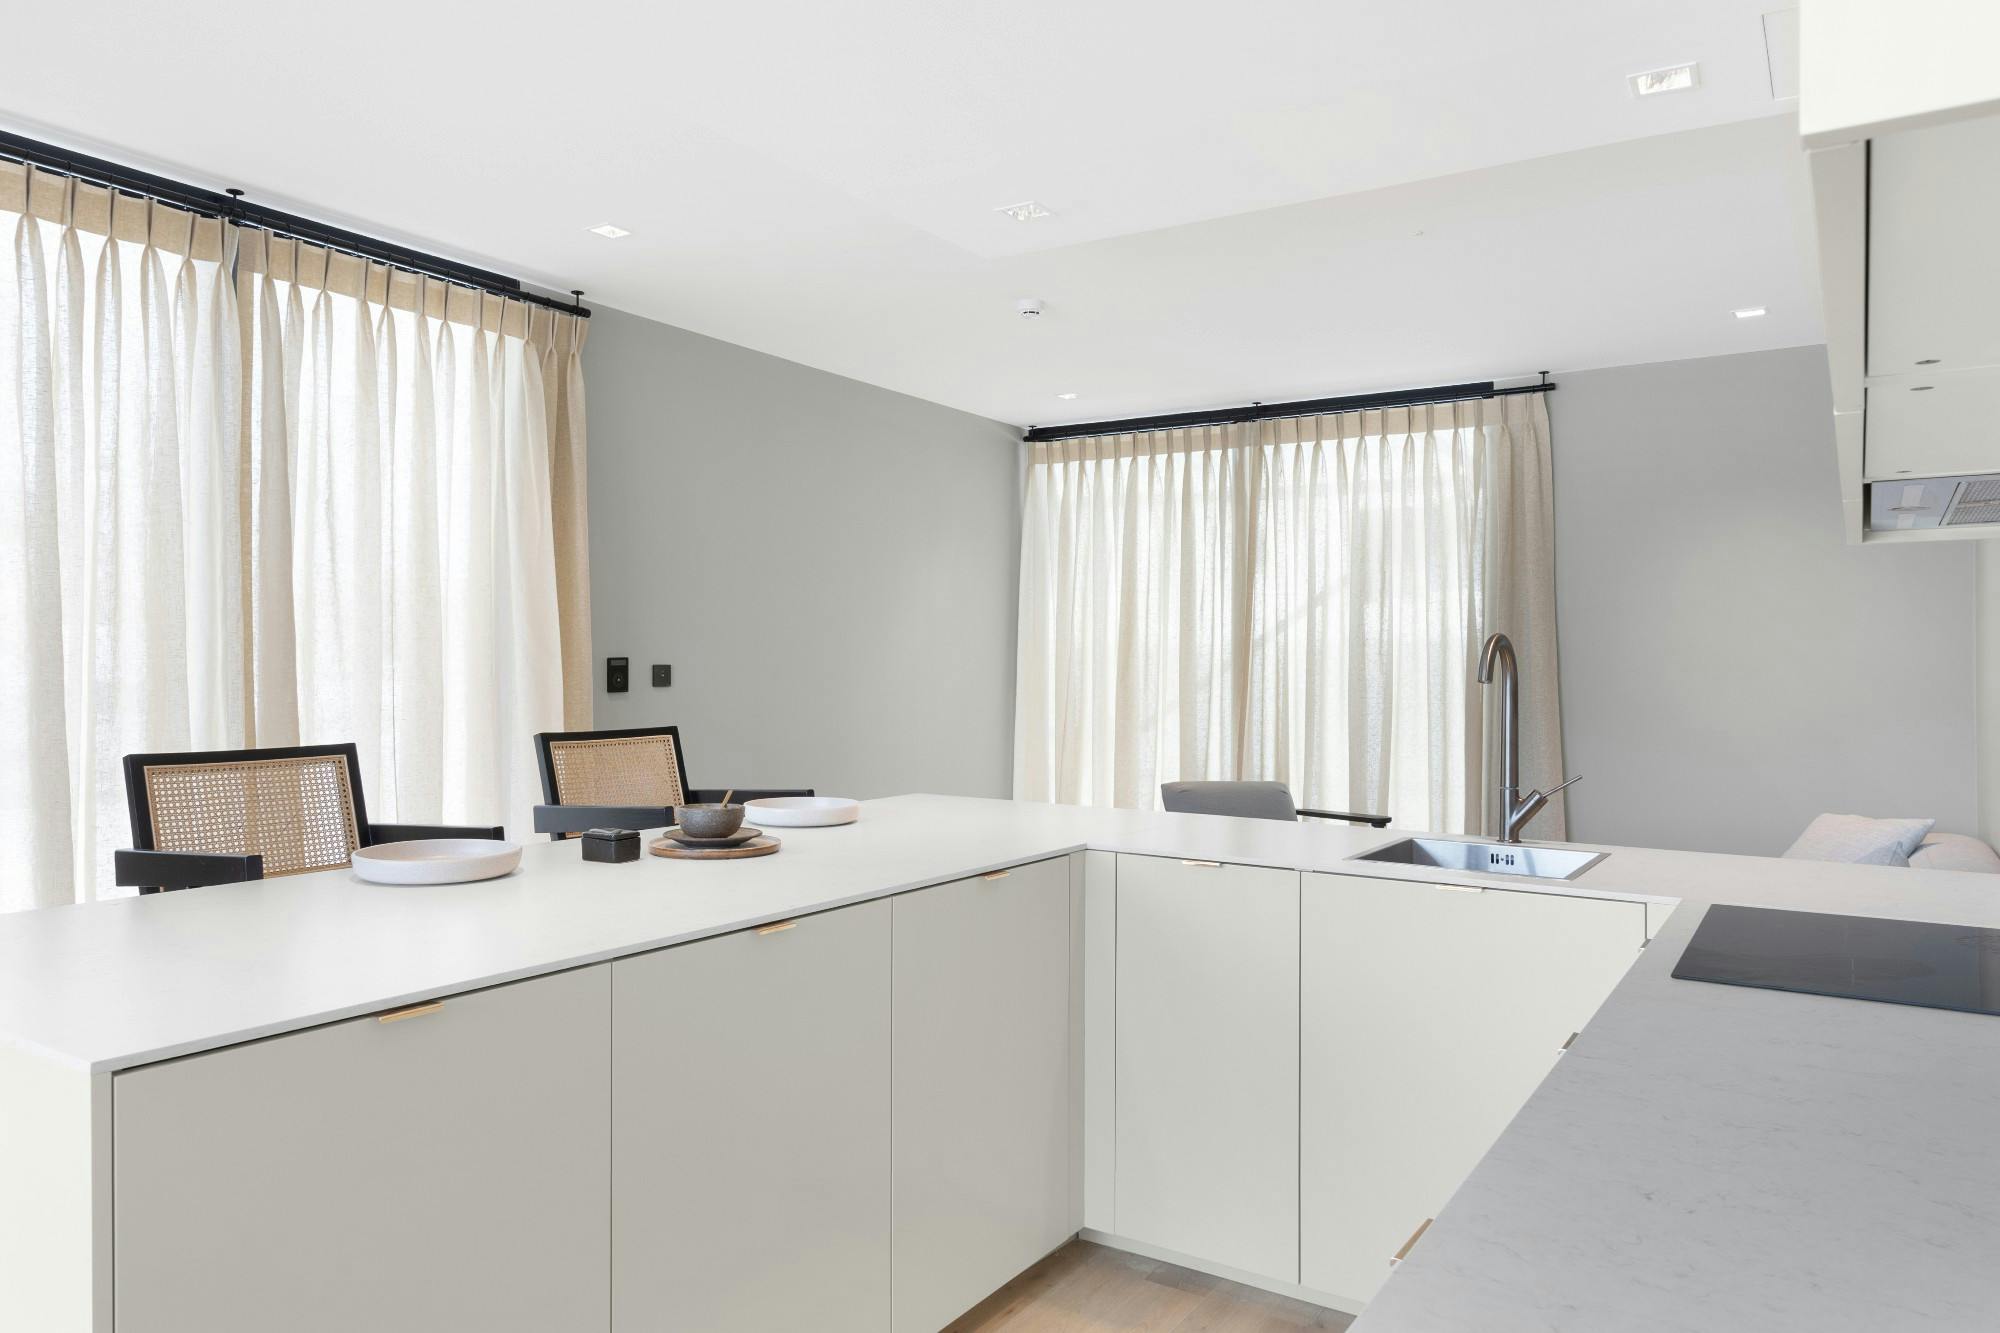 Image number 33 of the current section of Stanford University student housing features Silestone countertops in over 200 units in Cosentino Australia